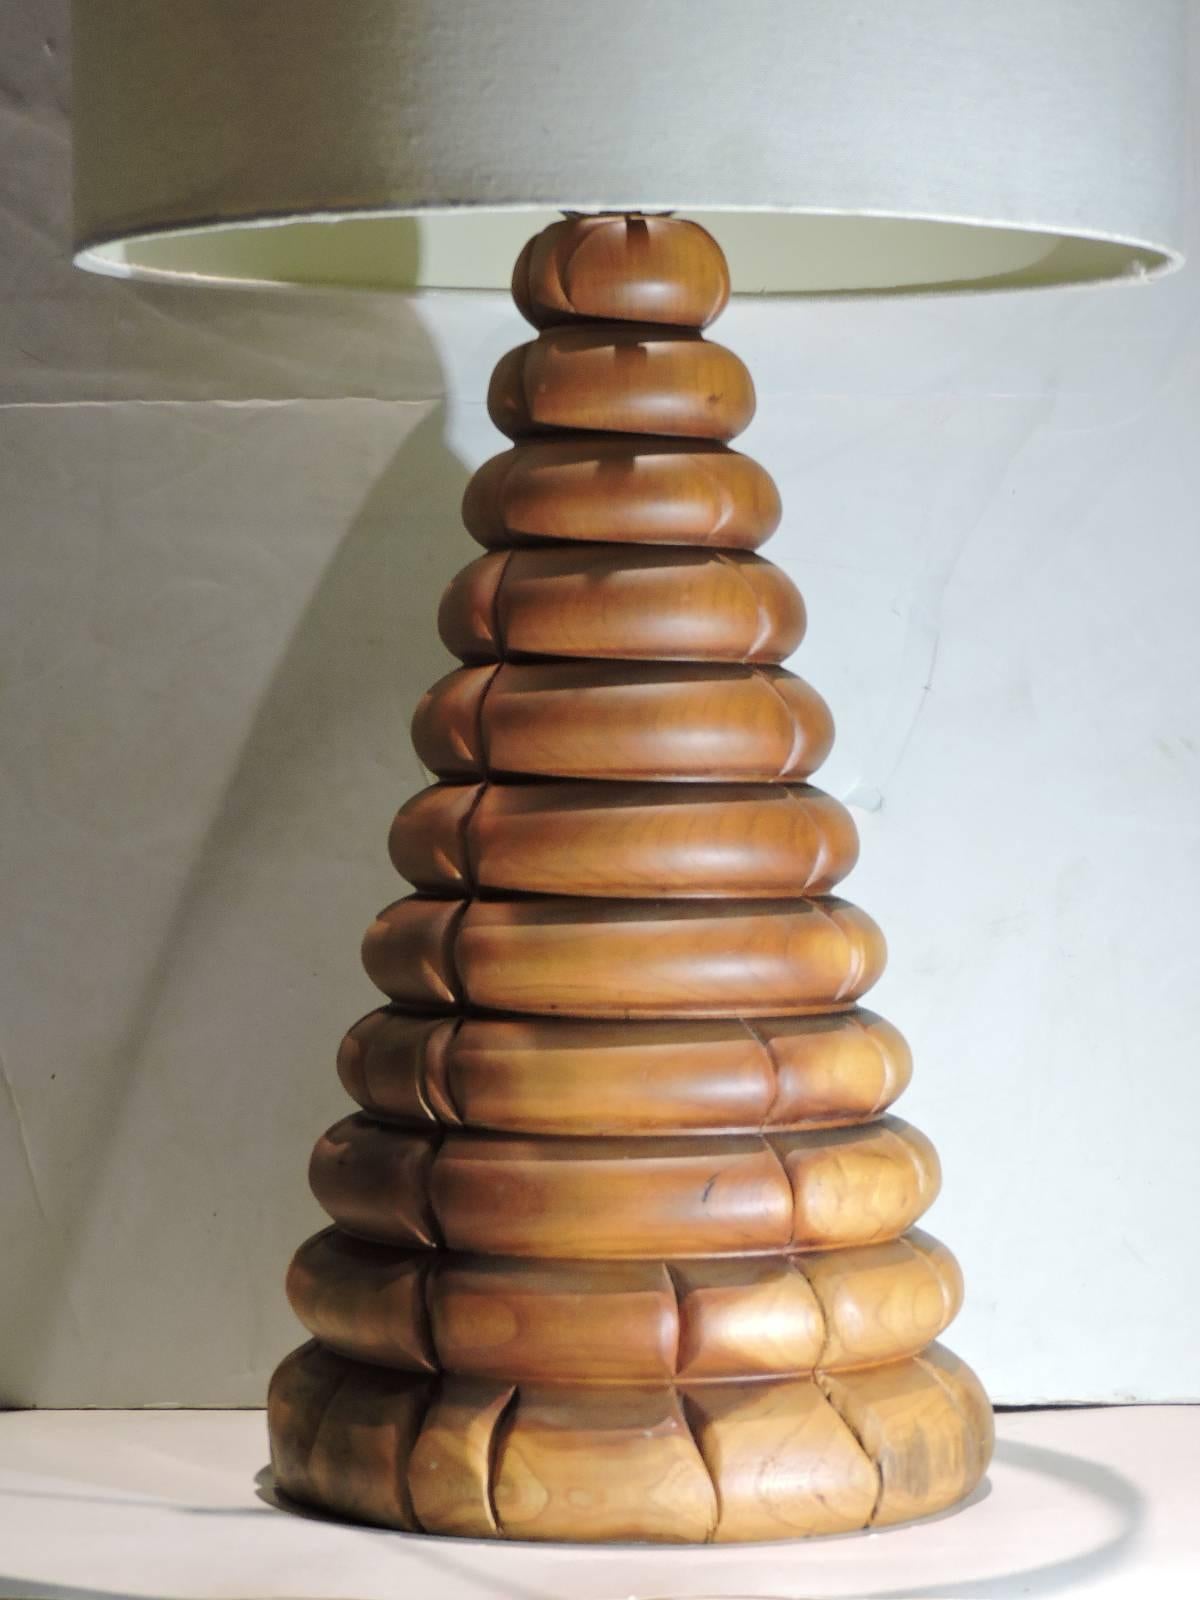 A 1970's American Craft Studio hand turned pyramidal beehive form natural hickory log lamp dating from the 1970's - artist signed - Tari.